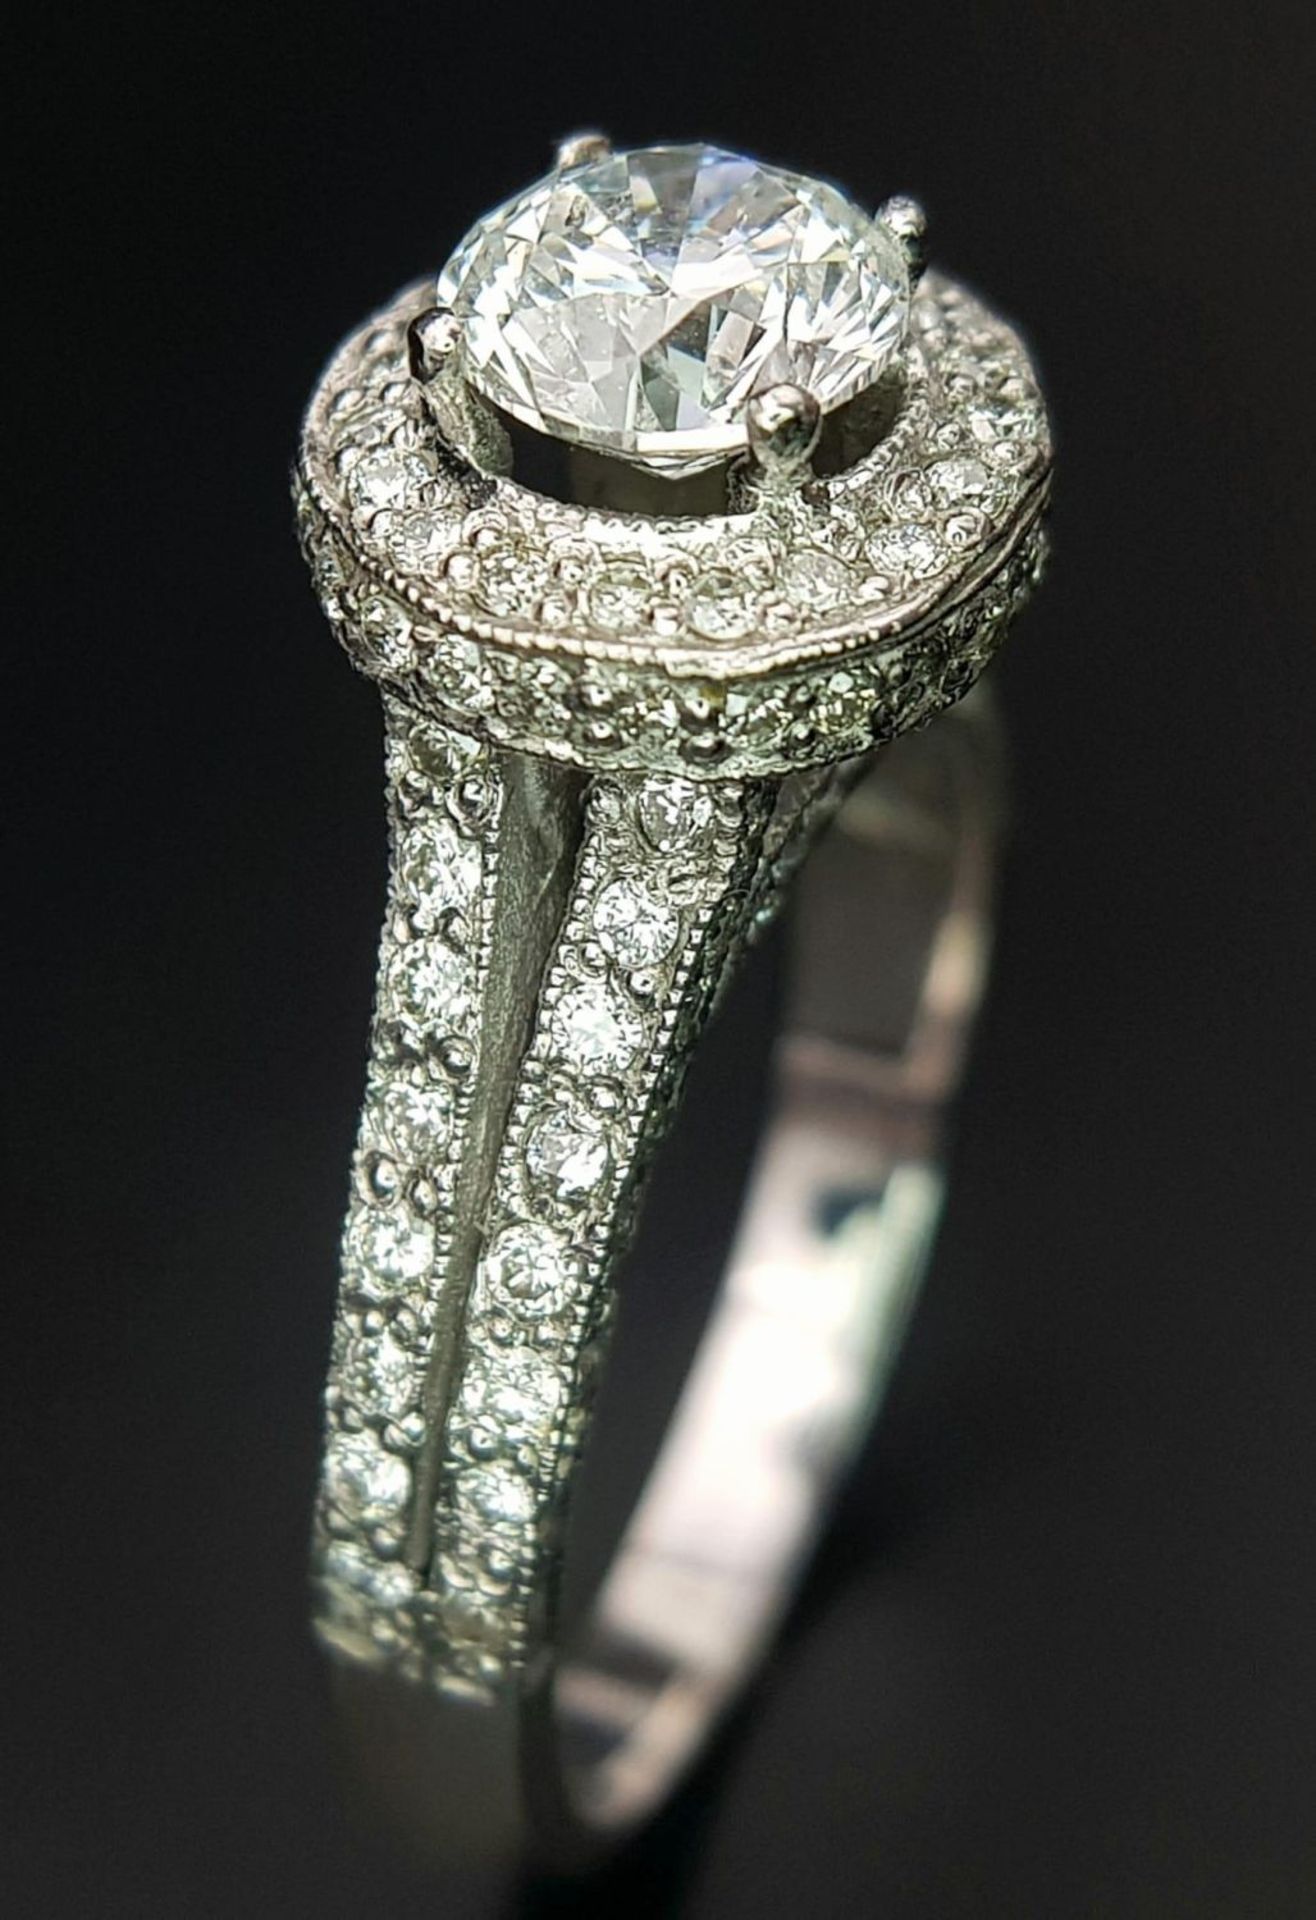 An 18 K white gold ring with a brilliant cut diamond (1.01 carats) surrounded by diamonds on the top - Image 7 of 22